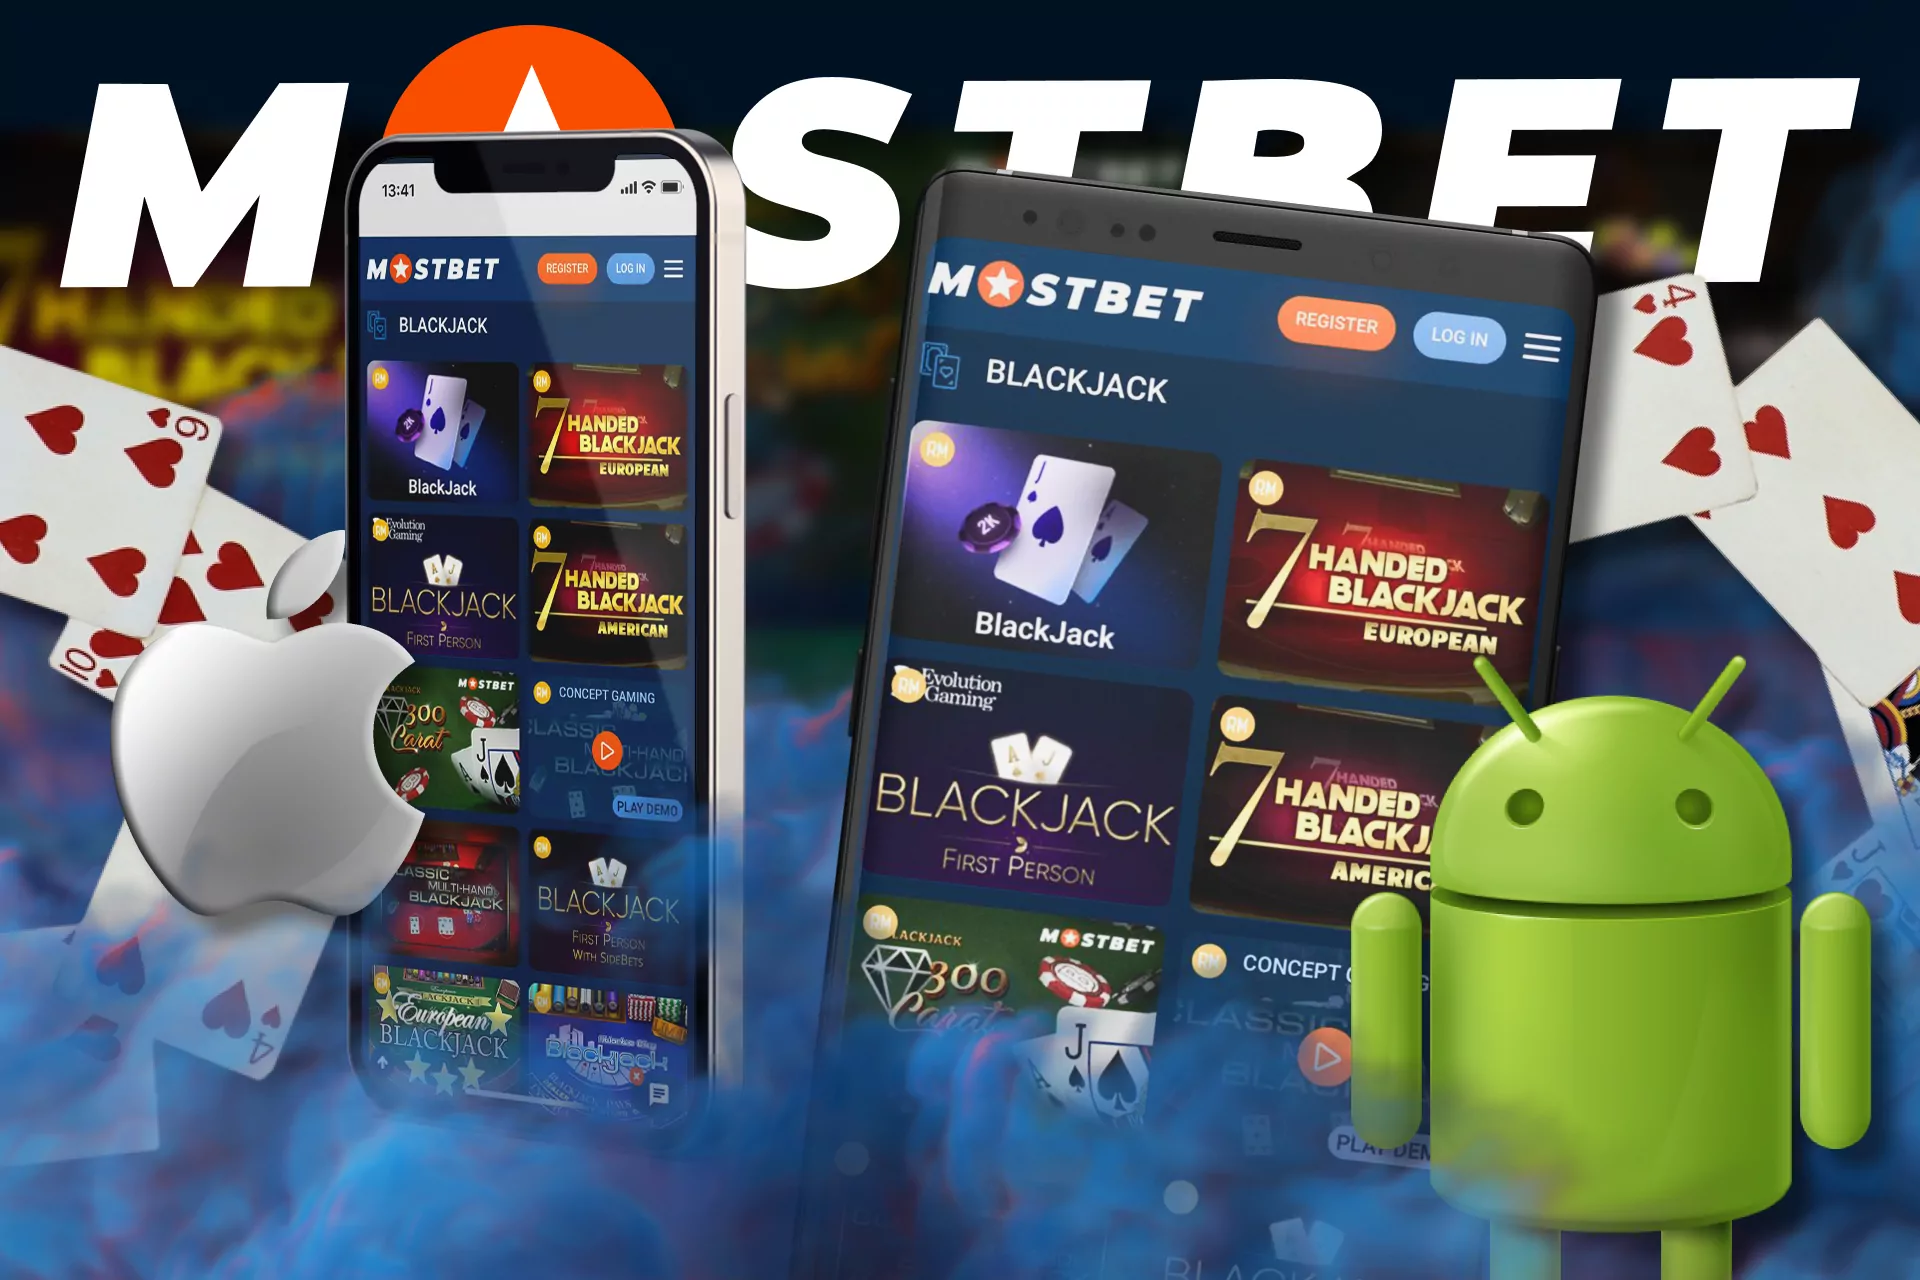 At Mostbet on your phone, bet on blackjack through the app.